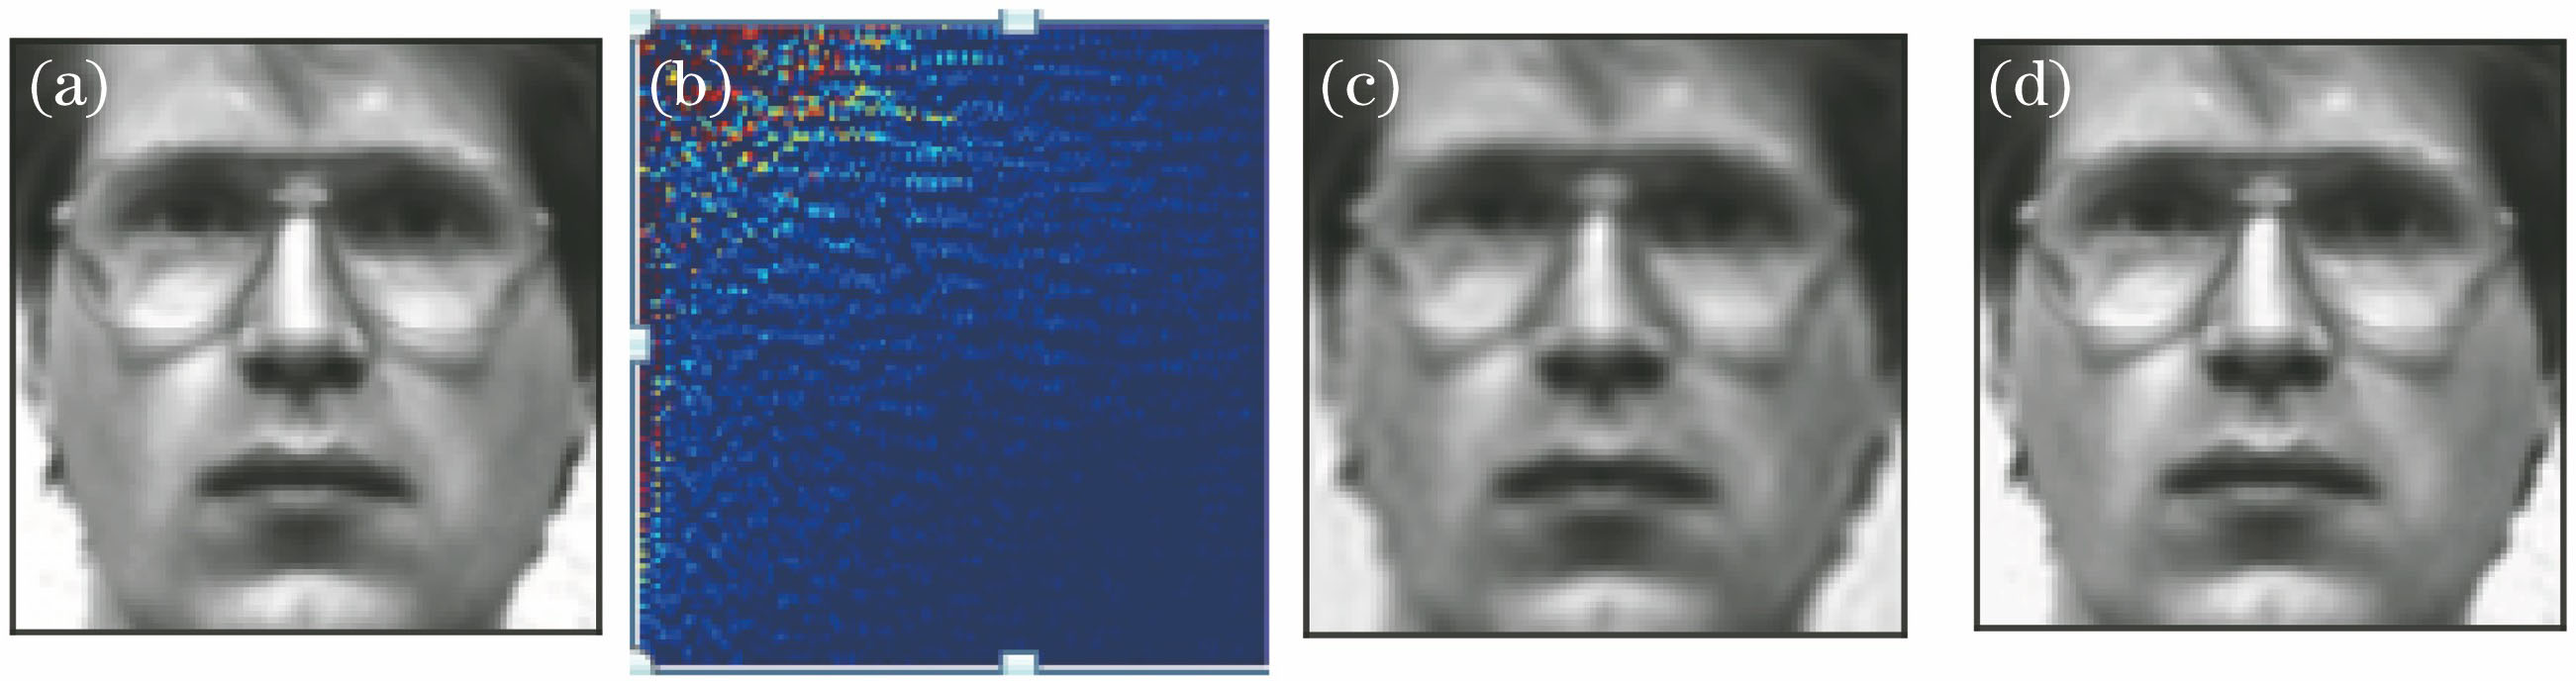 DCT transform and reconstruction of face image. (a) Original image (128×128); (b) DCT energy distribution map; (c) face image reconstructed with coefficients 24×24; (d) face image reconstructed with coefficients 48×48